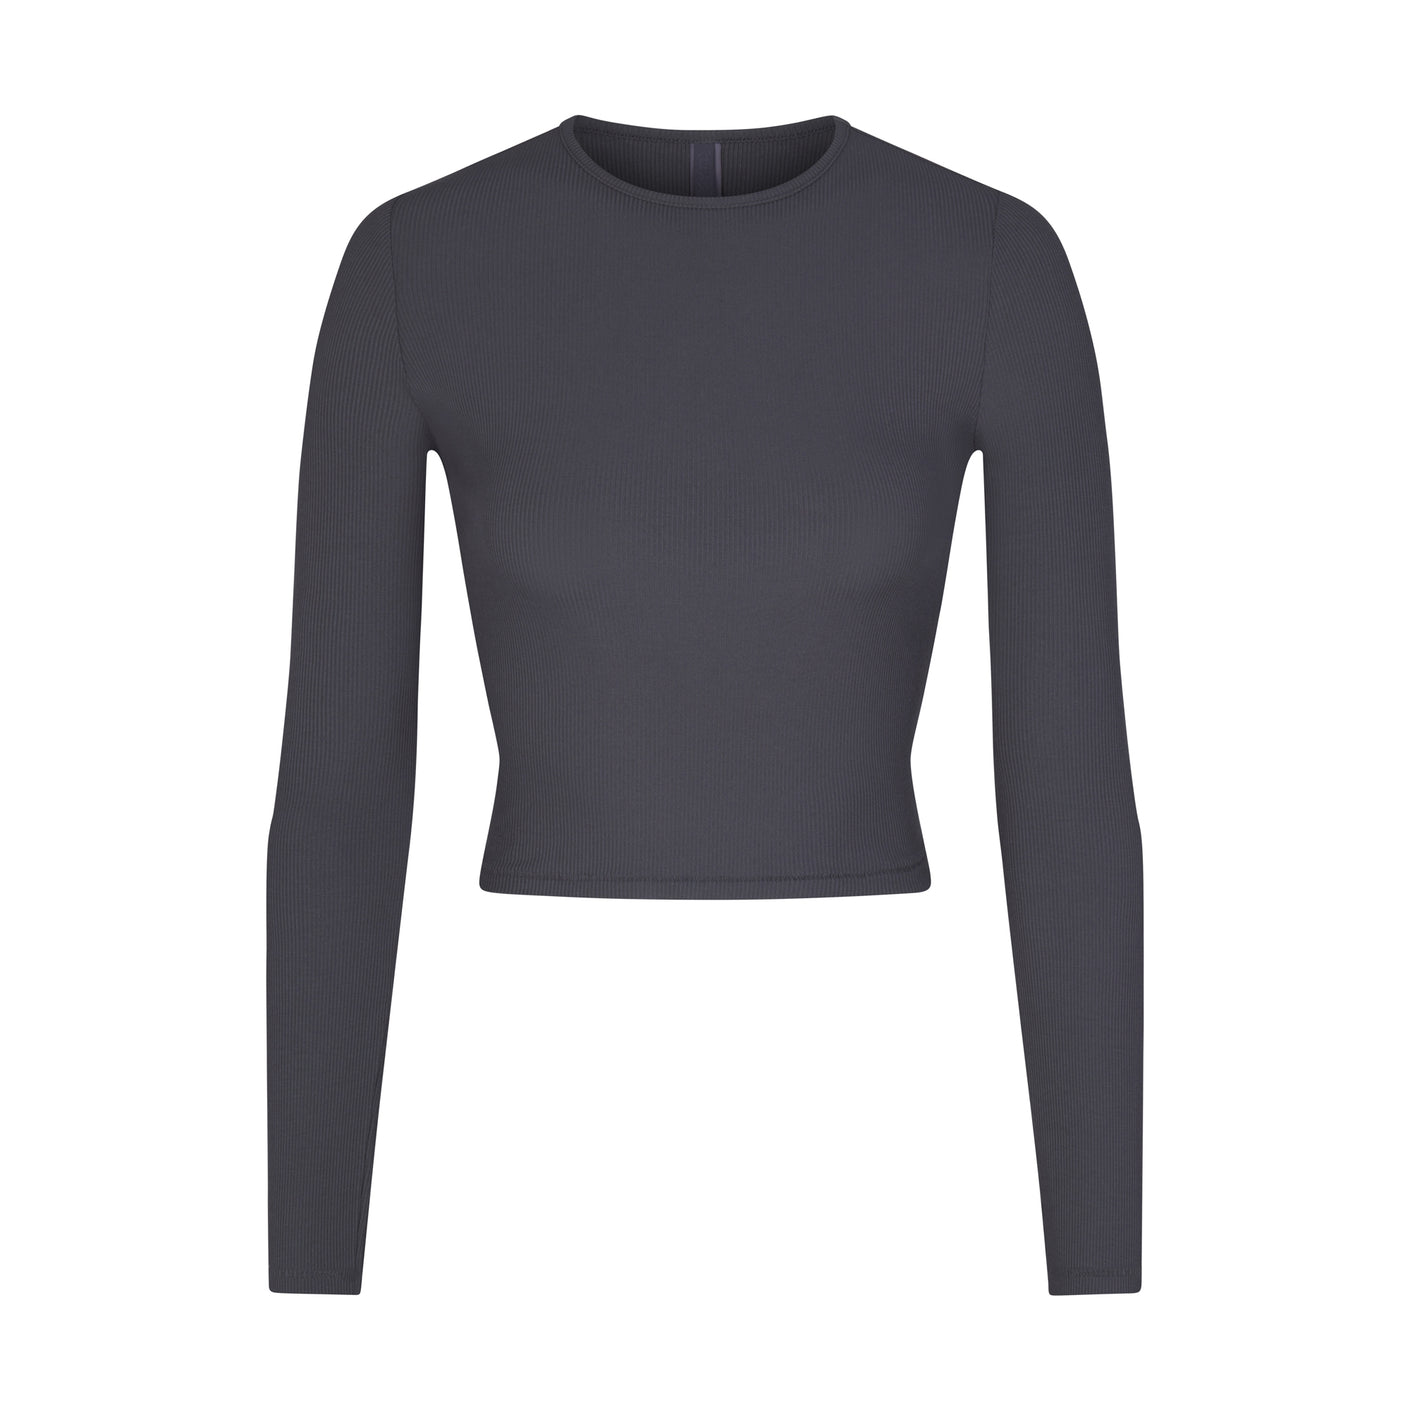 SOFT LOUNGE LONG SLEEVE CROP TOP | GRAPHITE